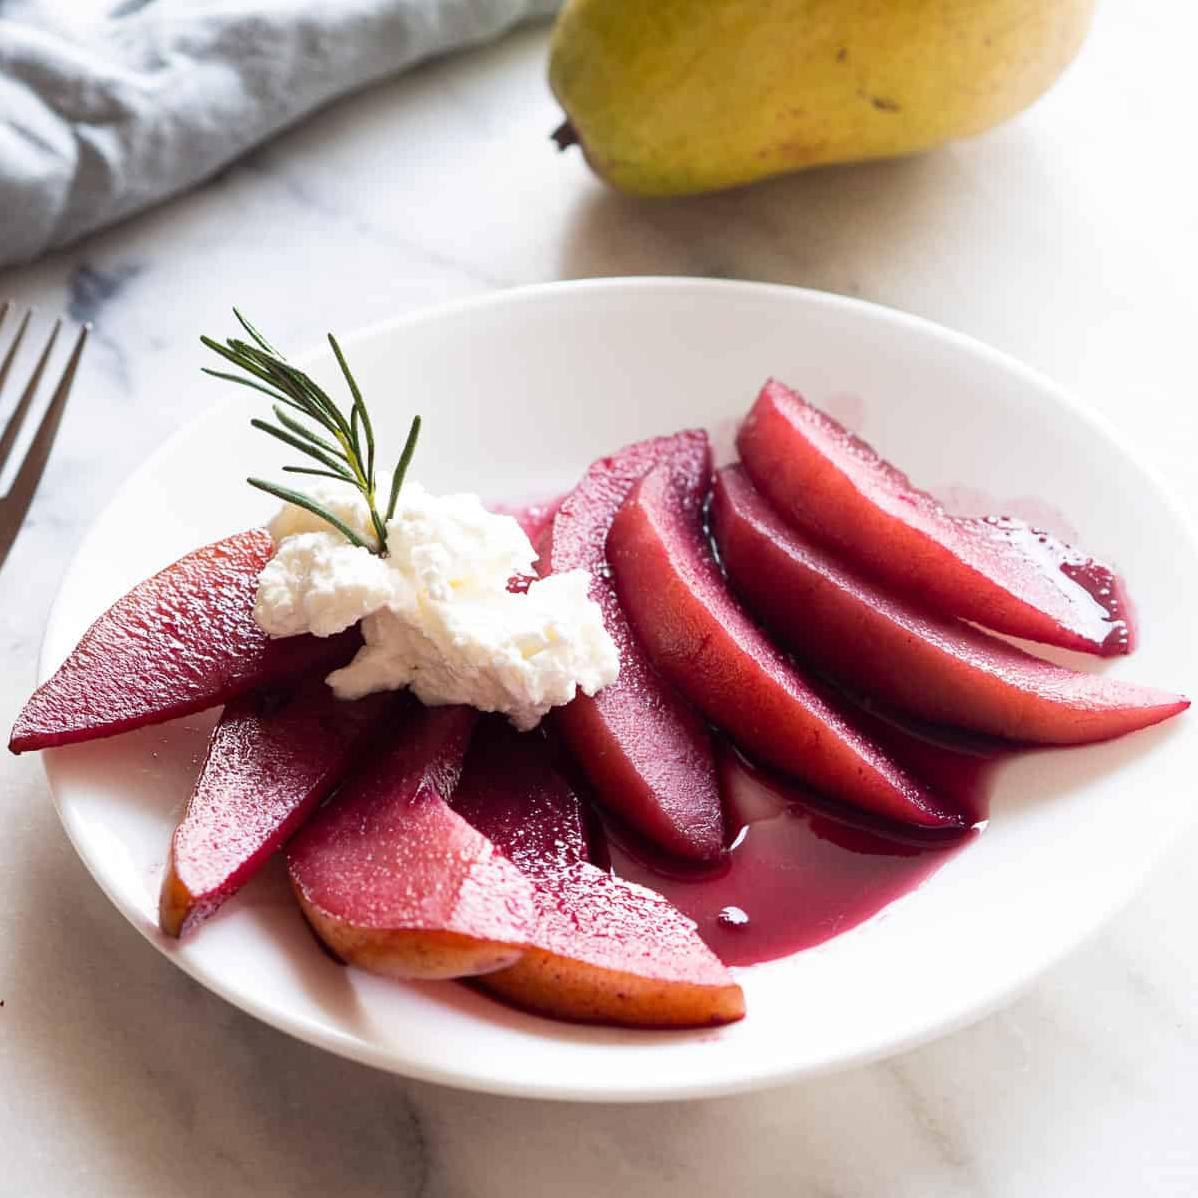  The sweetness of the pears perfectly balances the spicy aroma of the red wine.